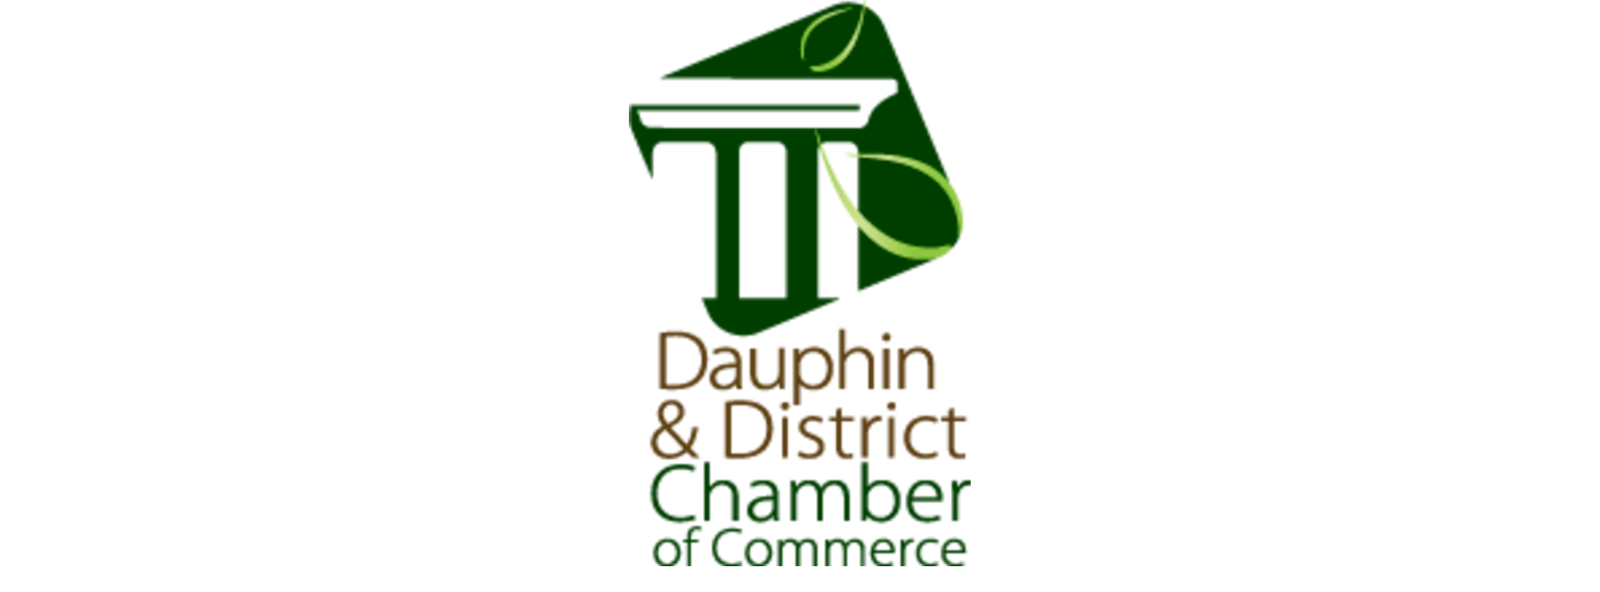 Dauphin & District Chamber of Commerce